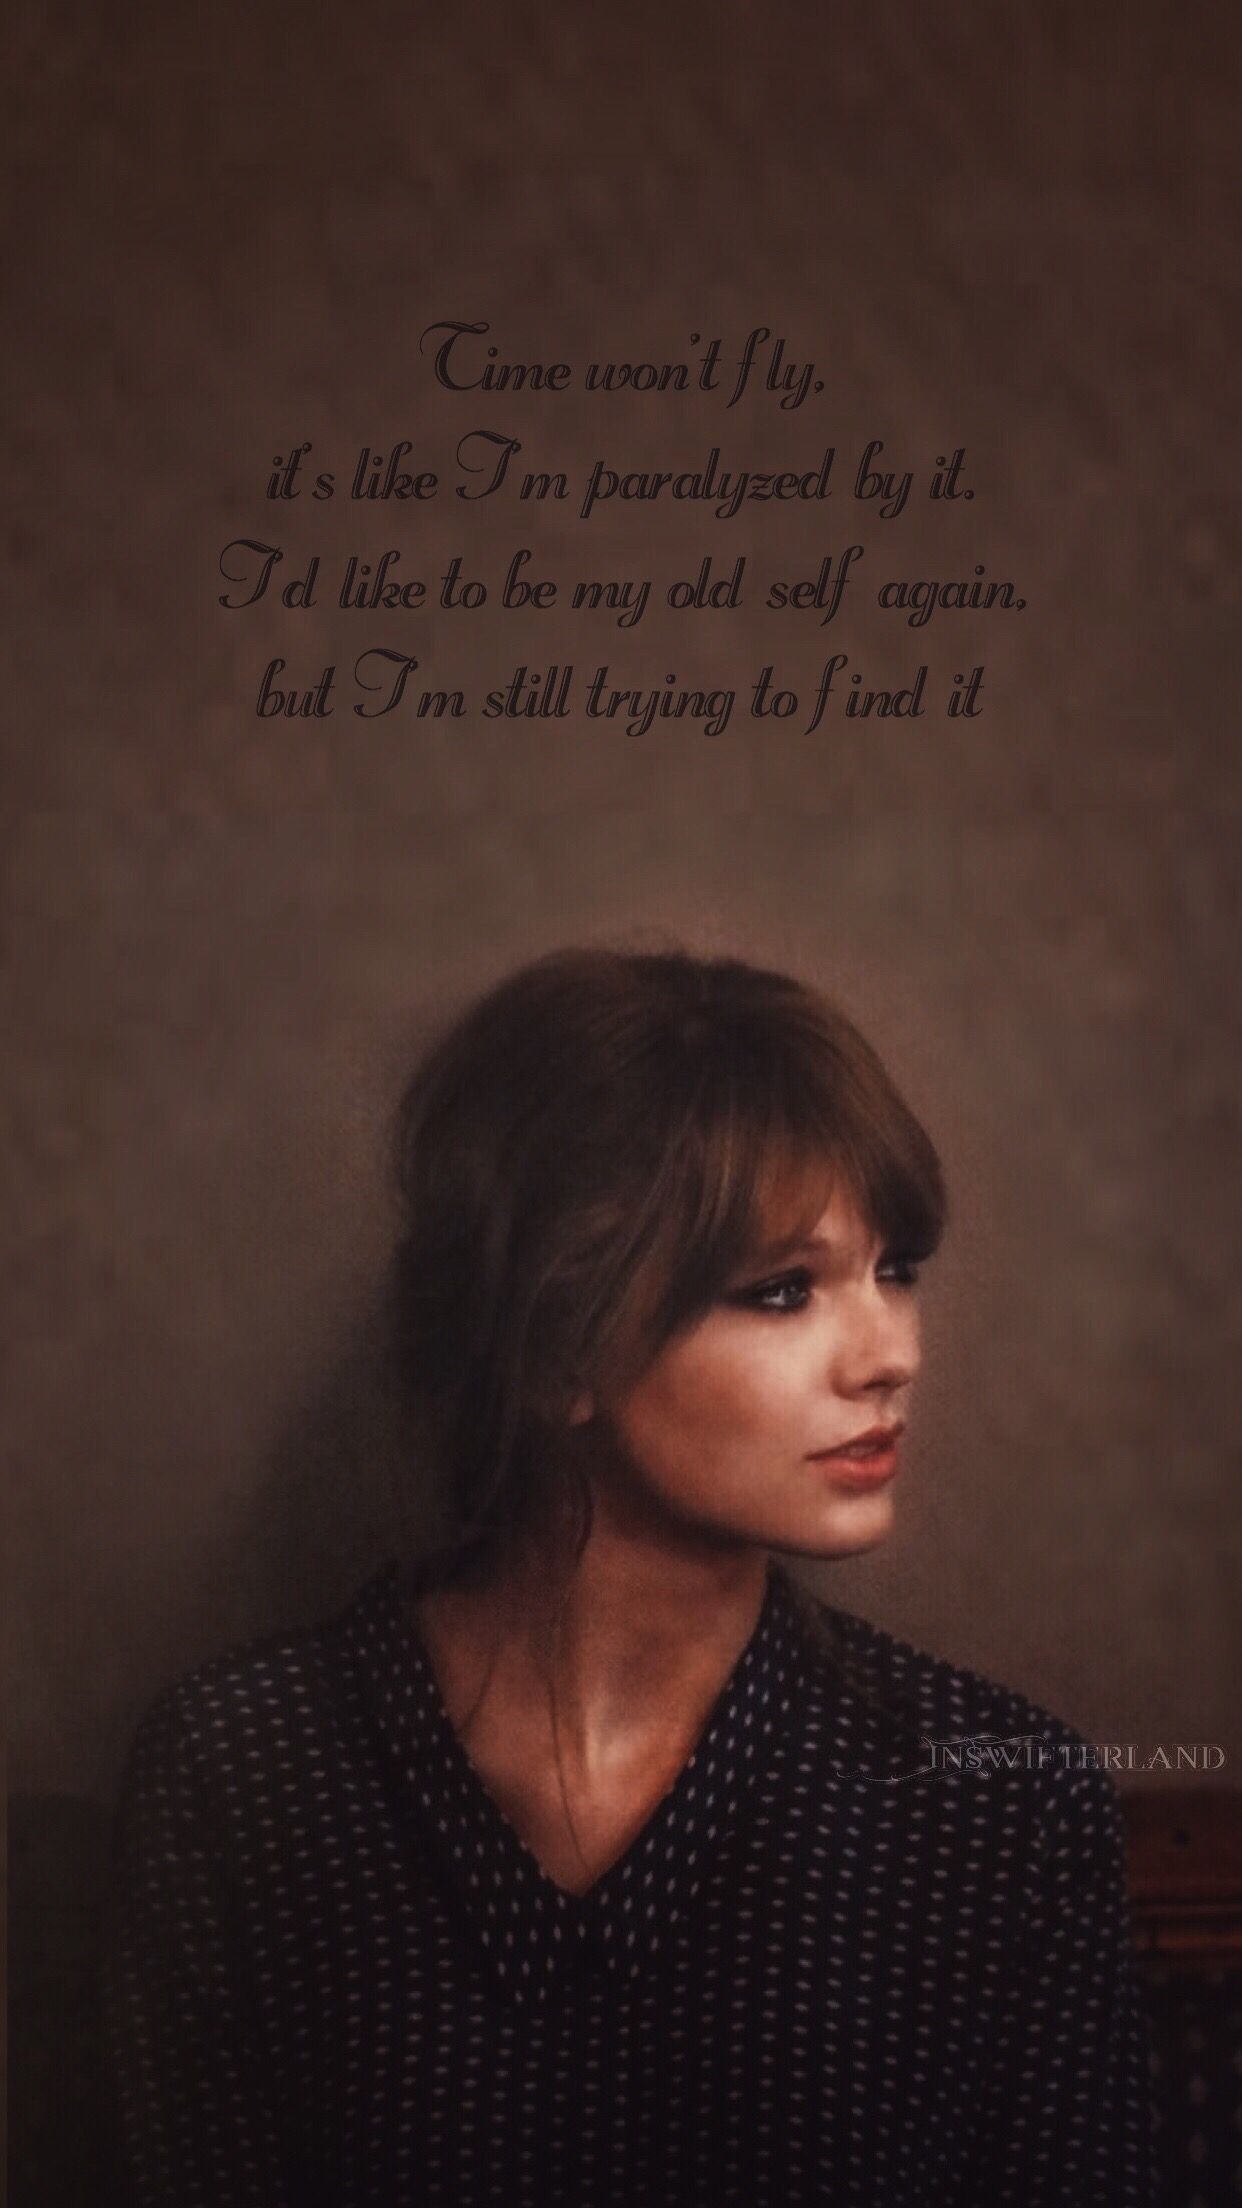 Taylor Swift Wallpaper. Taylor swift quotes, Taylor swift lyrics, Taylor swift wallpaper